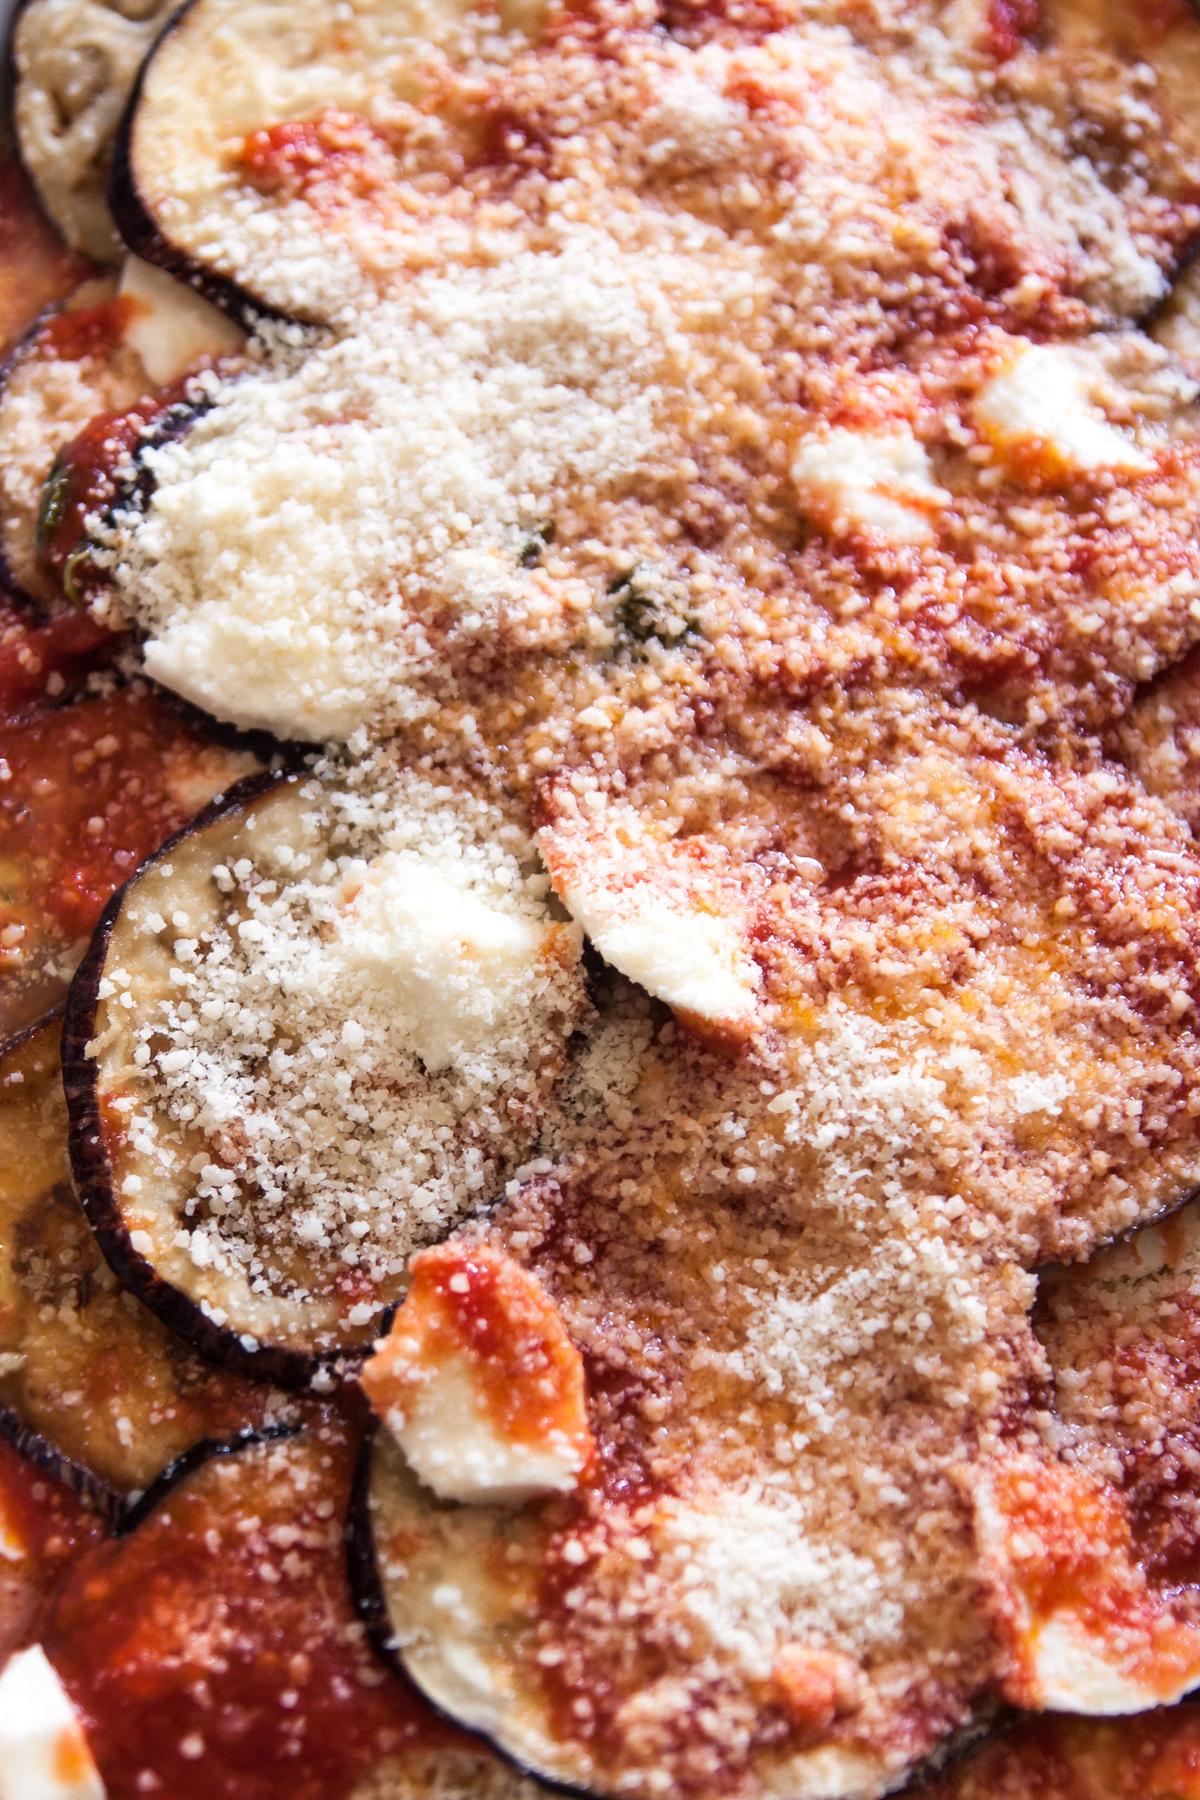 Top with a final layer of tomato sauce and cheese. (Giulia Scarpaleggia)